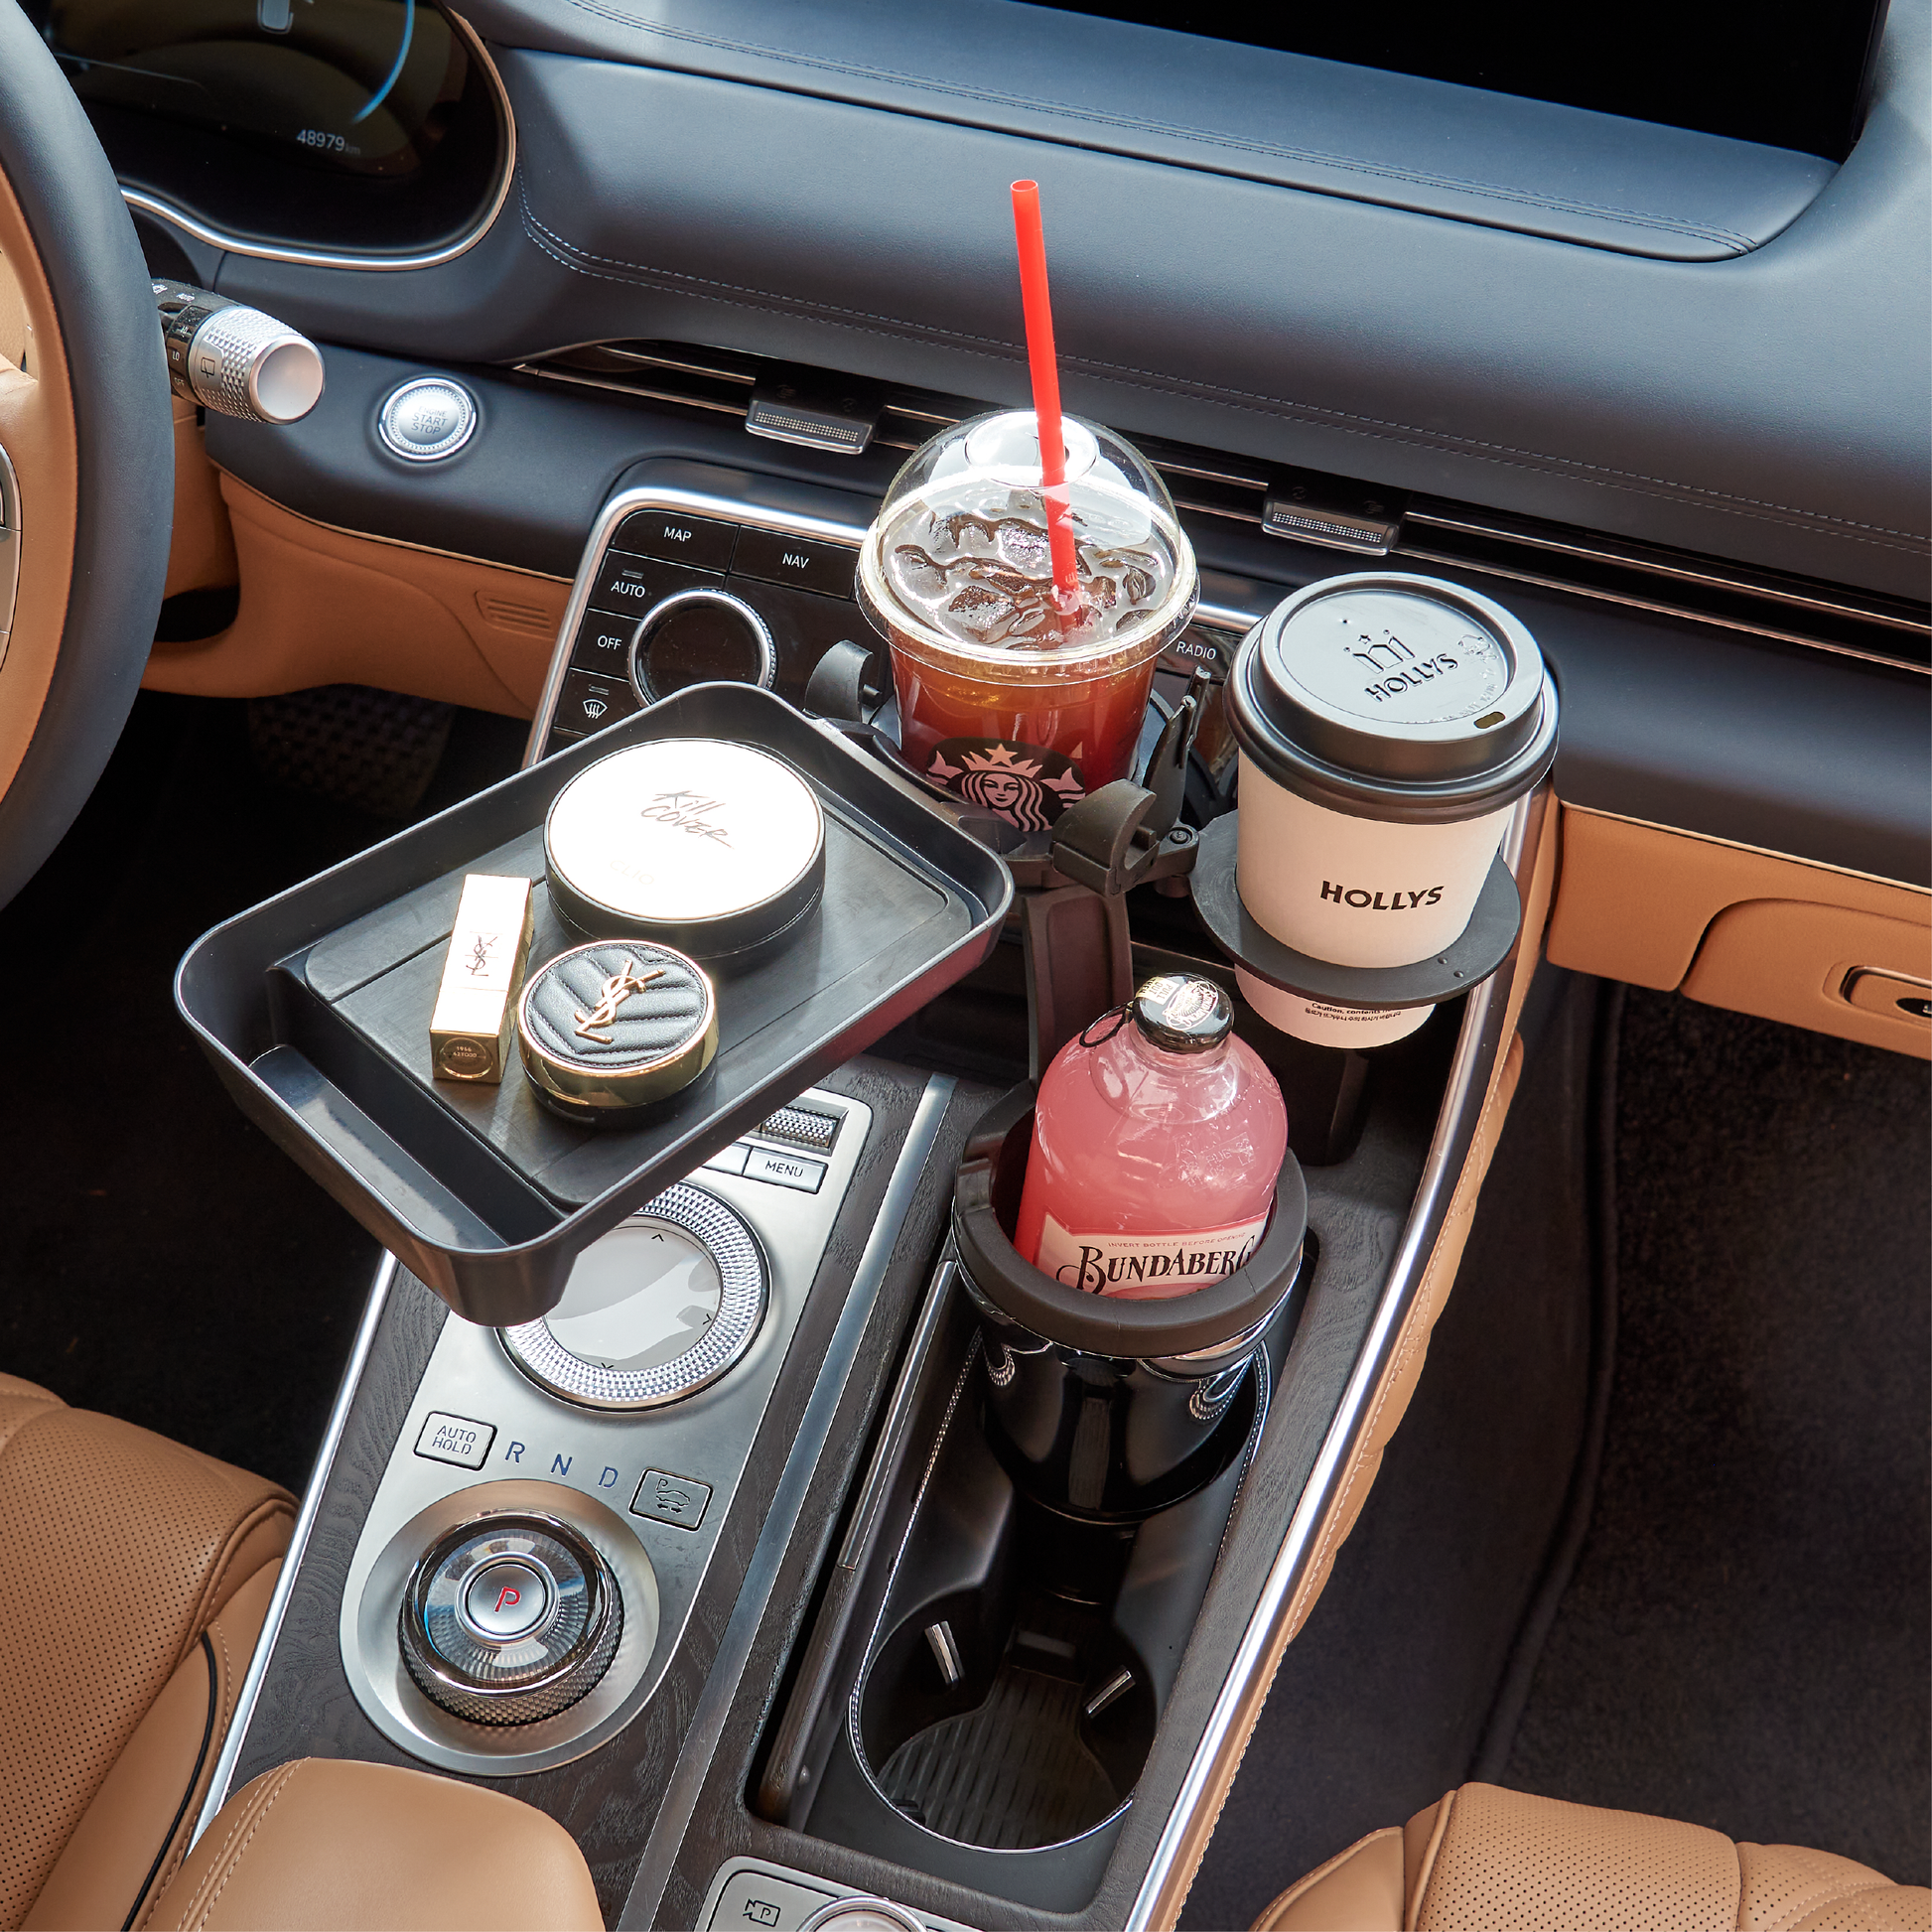 Boss Dady Multifunctional Car Cup Holder